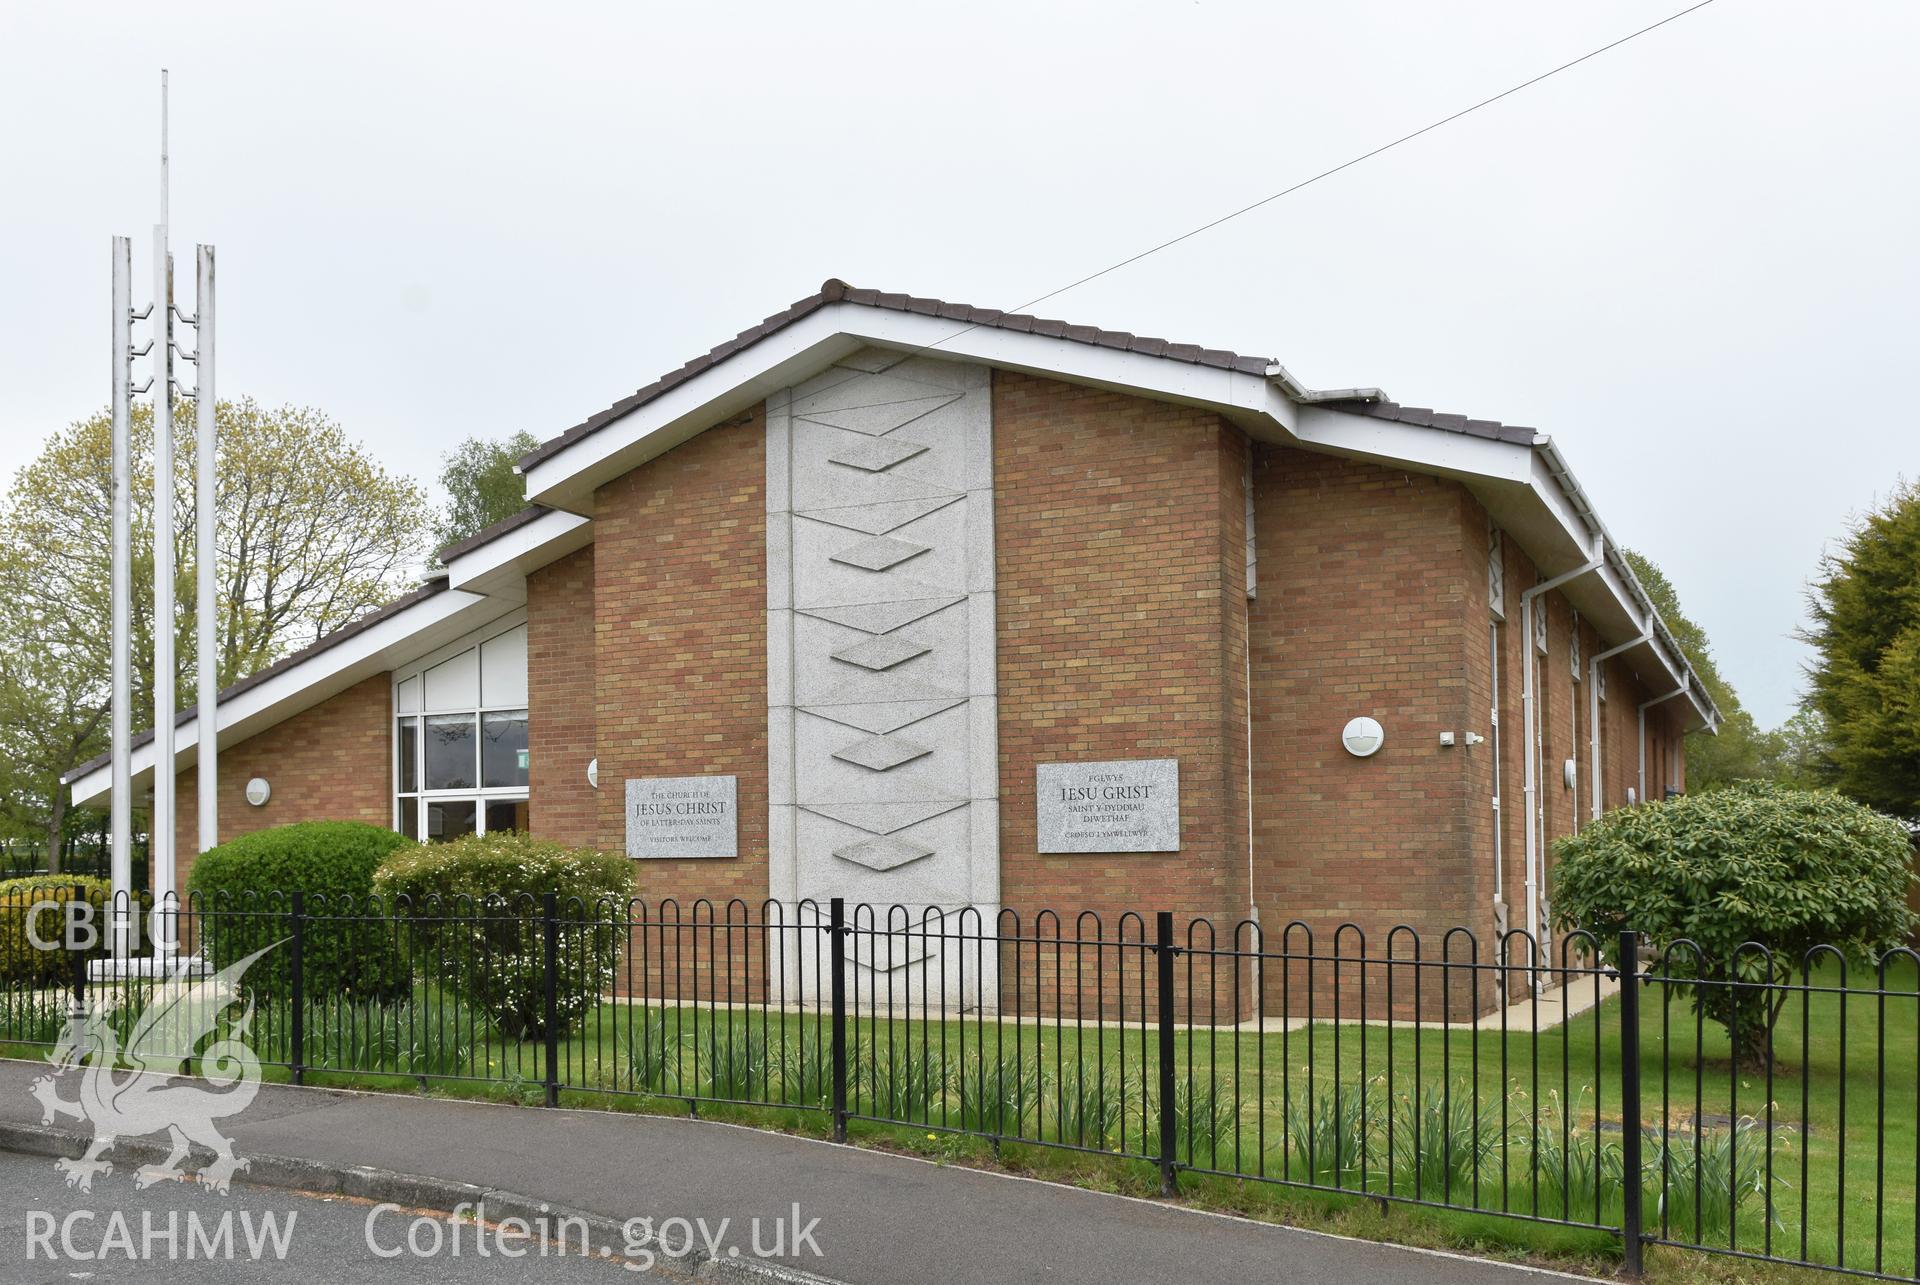 Exterior view showing side elevation of the Church of Jesus Christ of Latter Day Saints, Cwmbran, photographed by Susan Fielding of RCAHMW on 1 May 2021